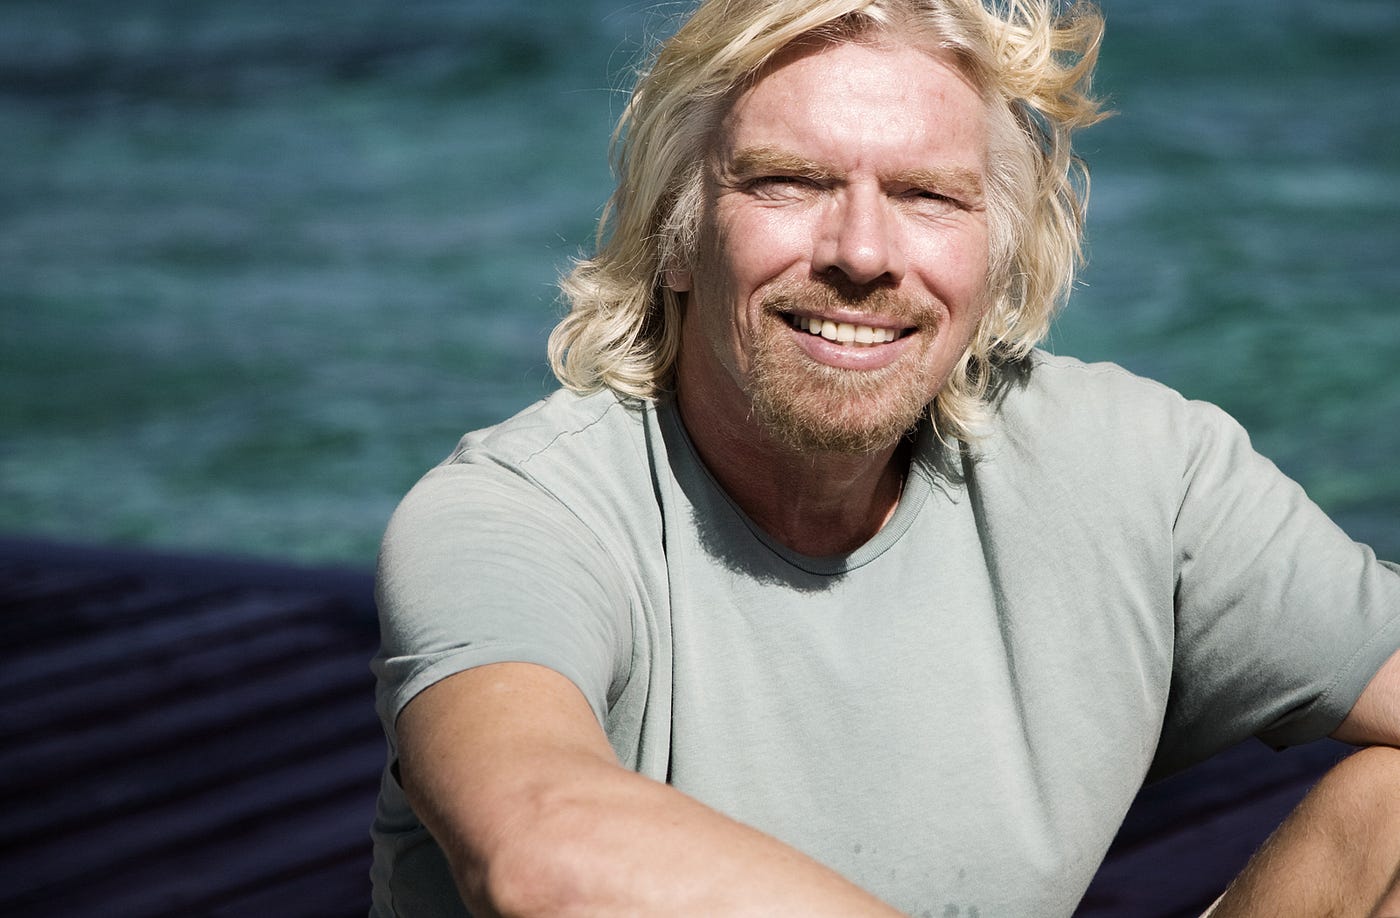 Sir Richard Branson: Life of the Virgin founder as he goes to space